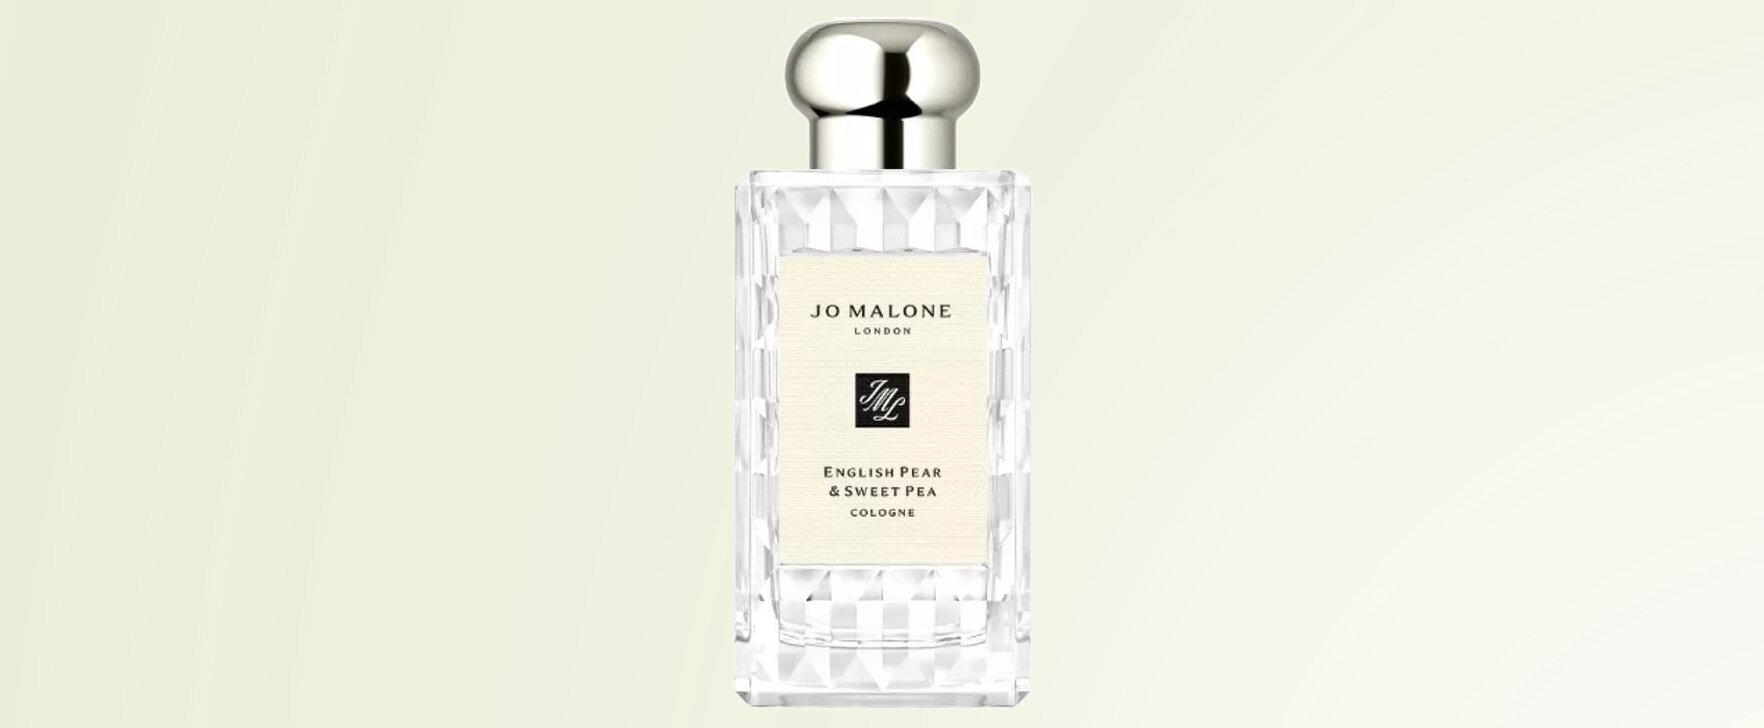 A Tribute to the Williams Pear: "English Pear & Sweet Pea" by Jo Malone